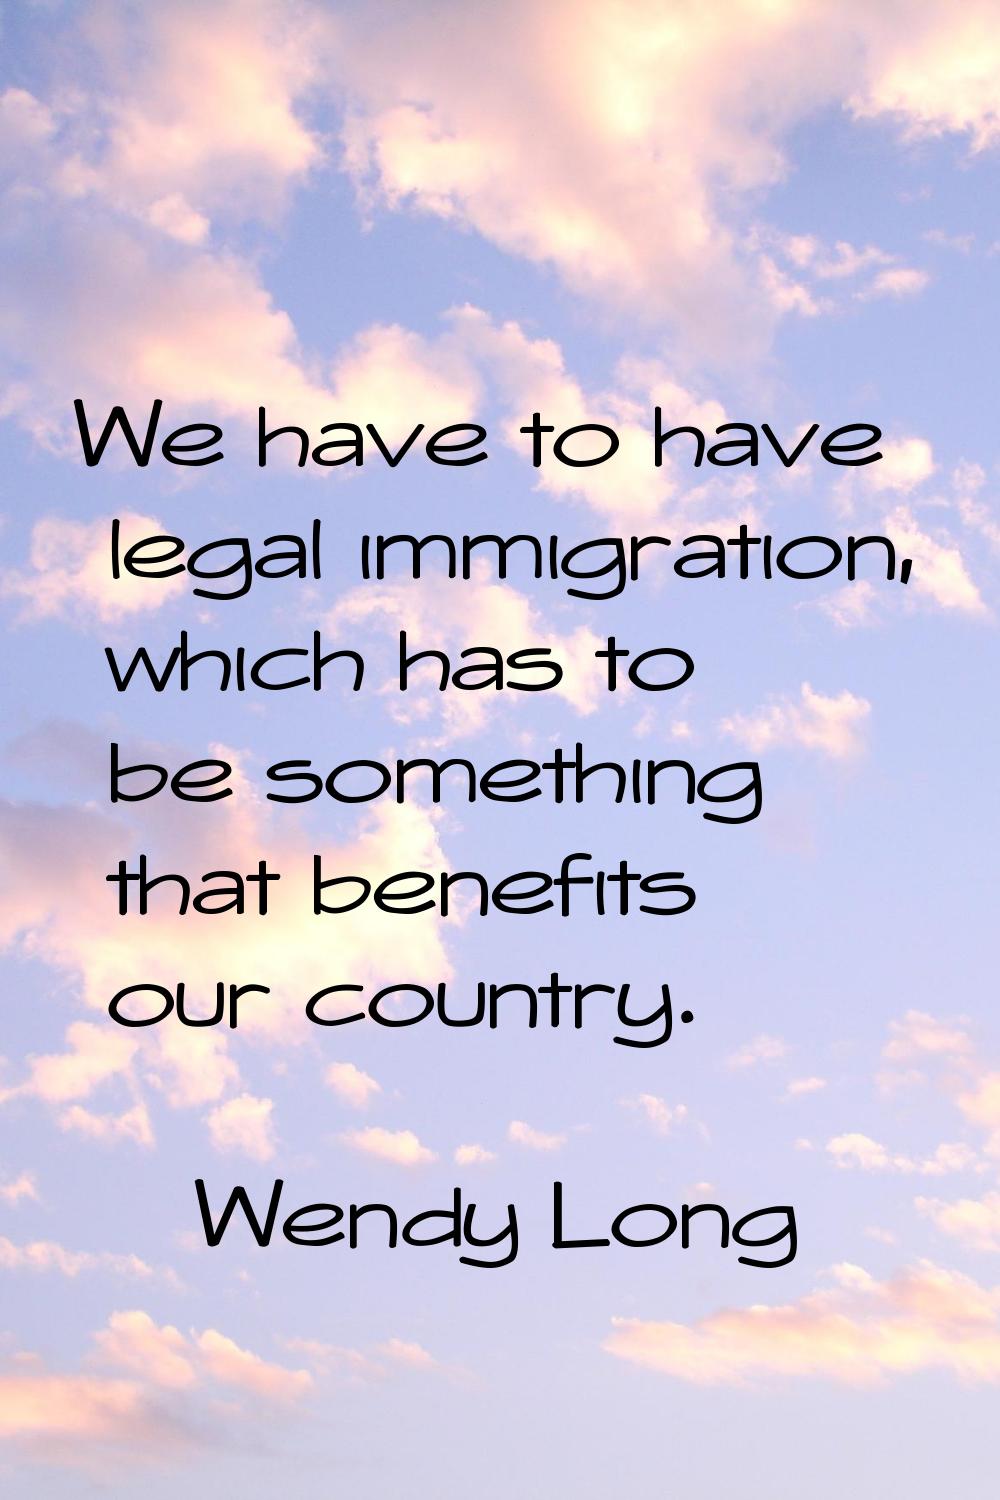 We have to have legal immigration, which has to be something that benefits our country.